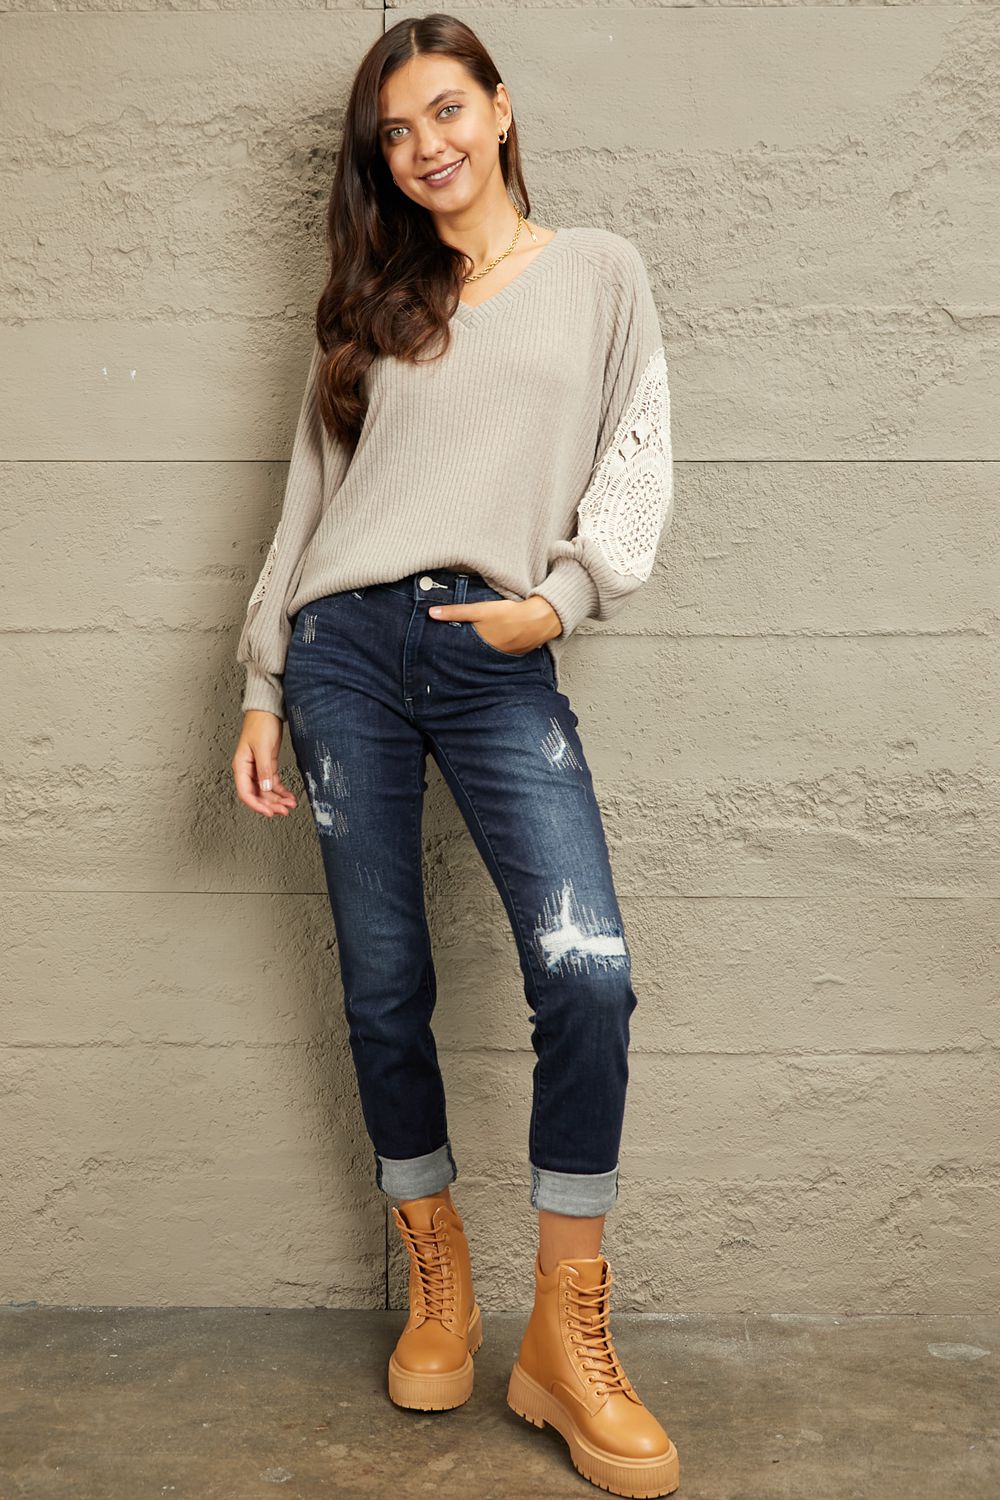 Lace Patch Detail Sweater in Beige